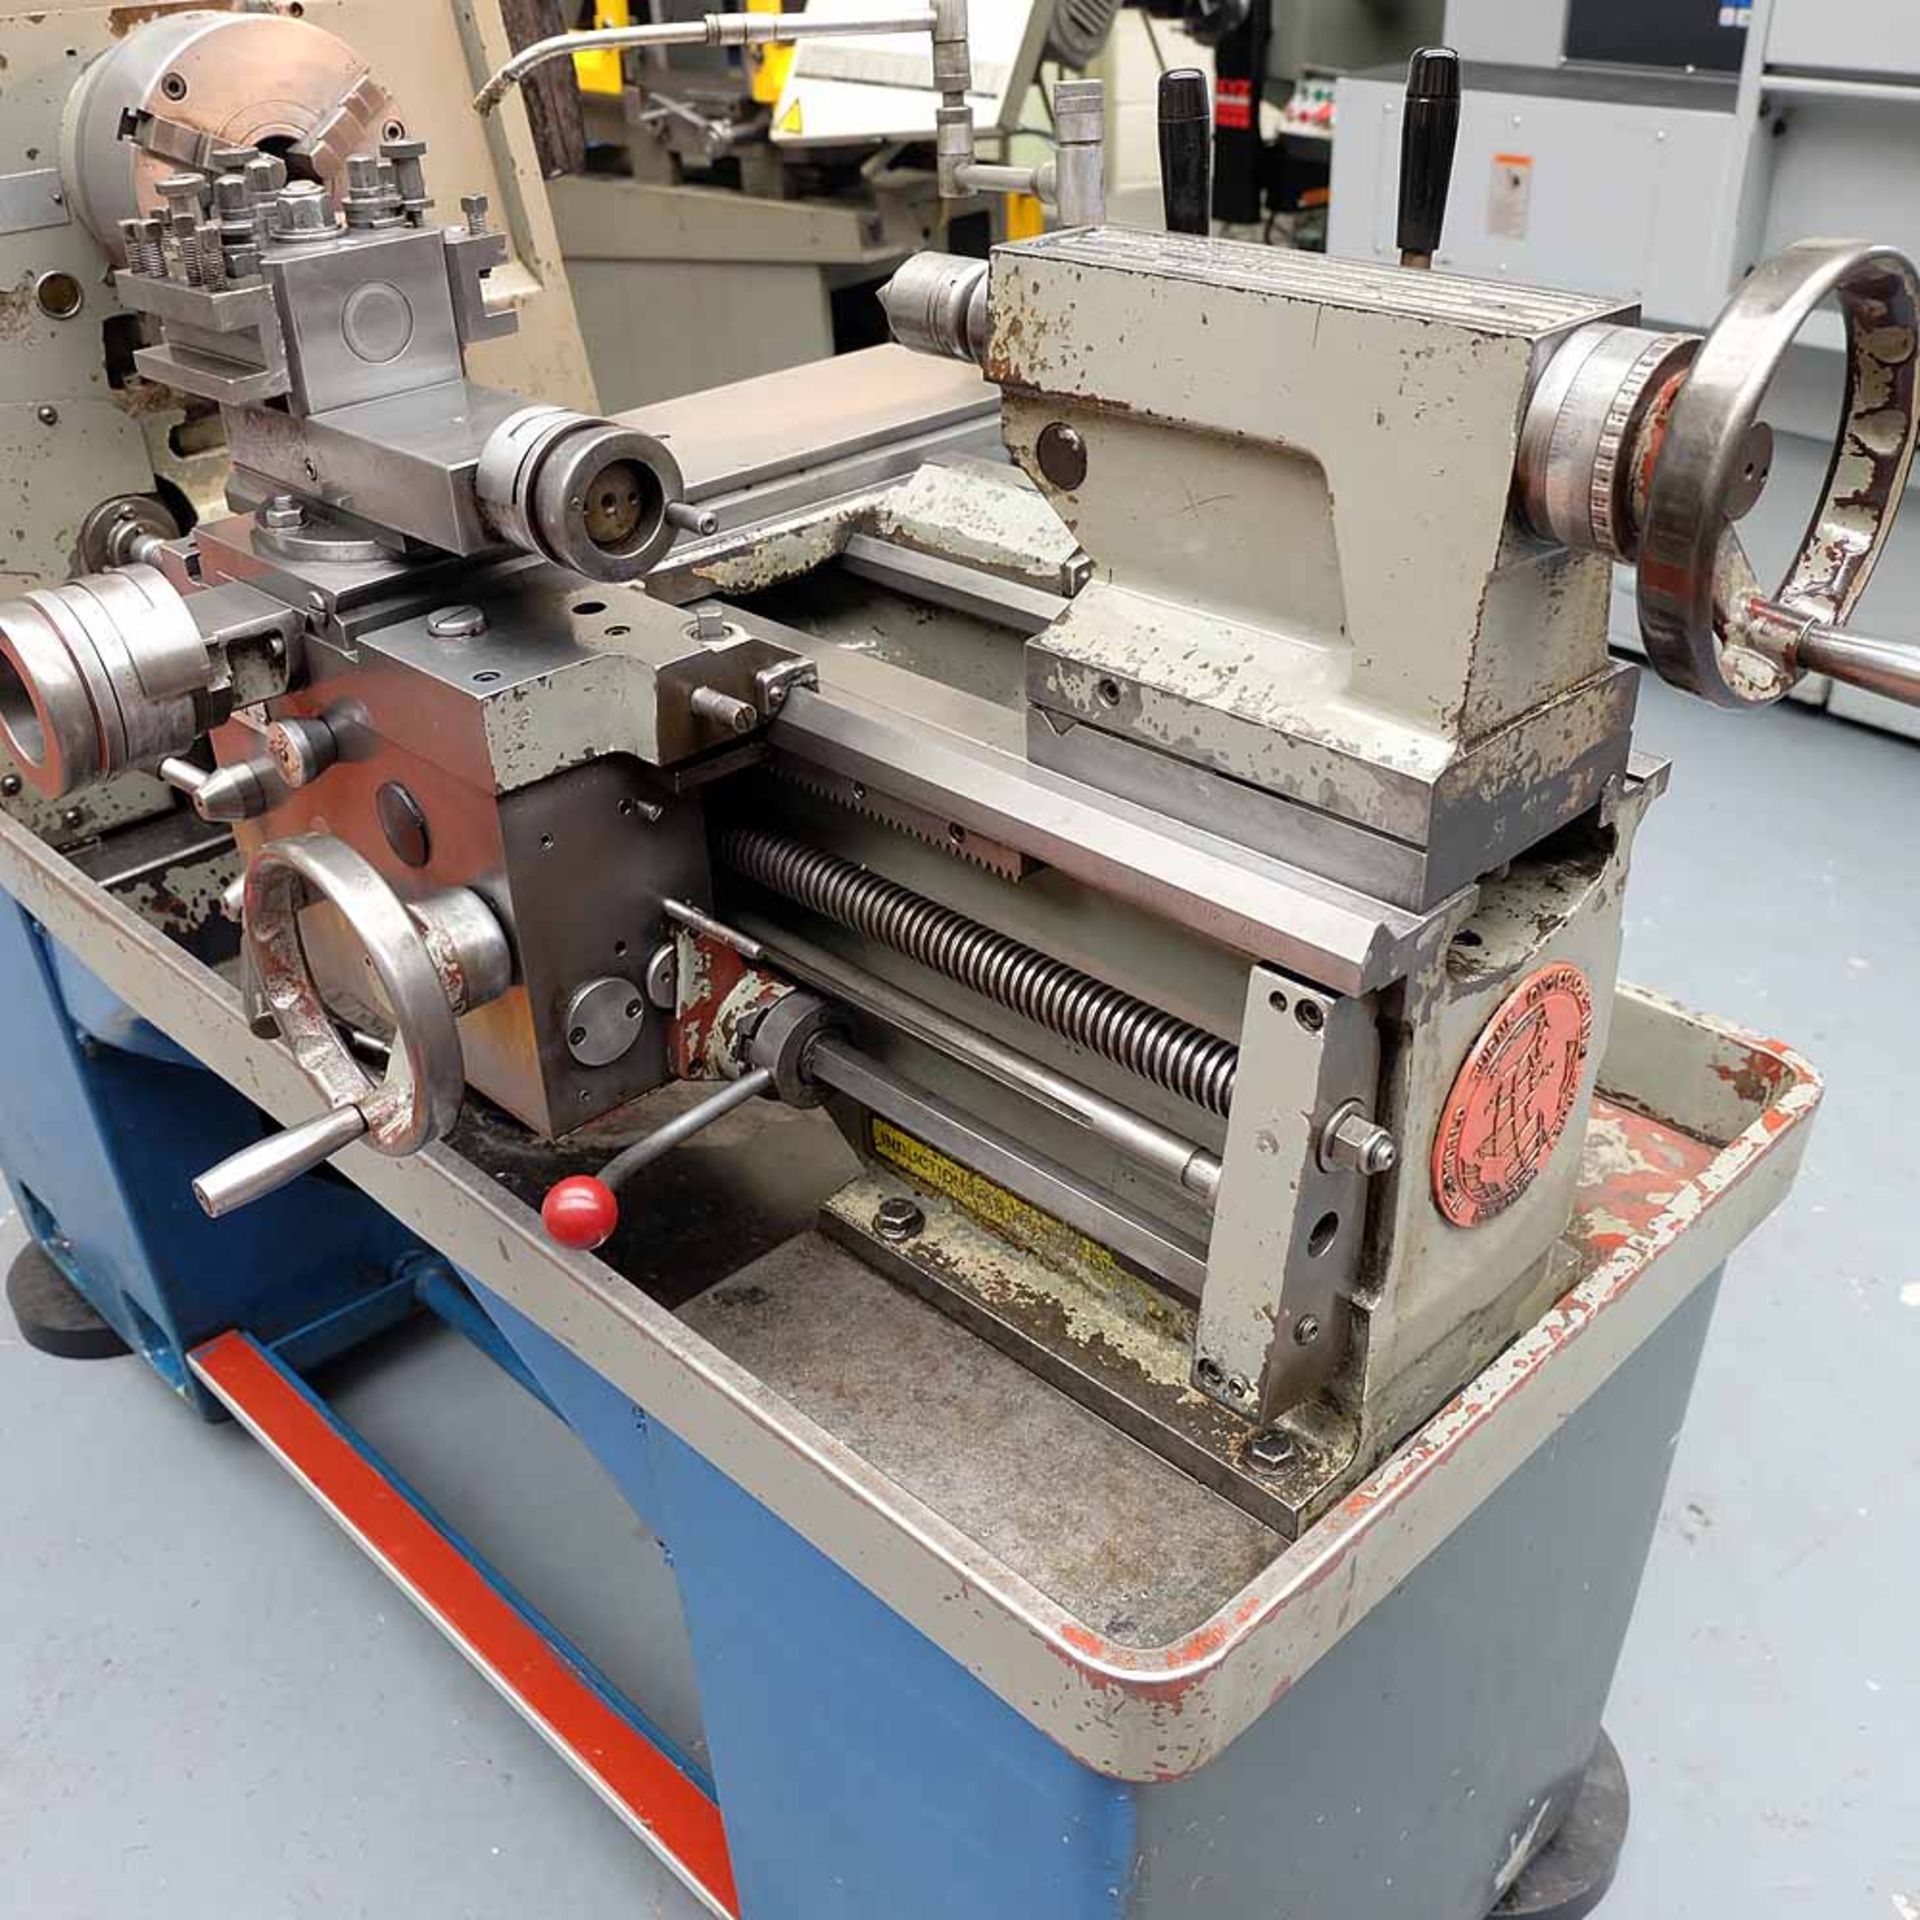 Colchester Student 1800 Gap Bed Centre Lathe. Capacity 13" Diameter x 25" Between Centres. - Image 6 of 6